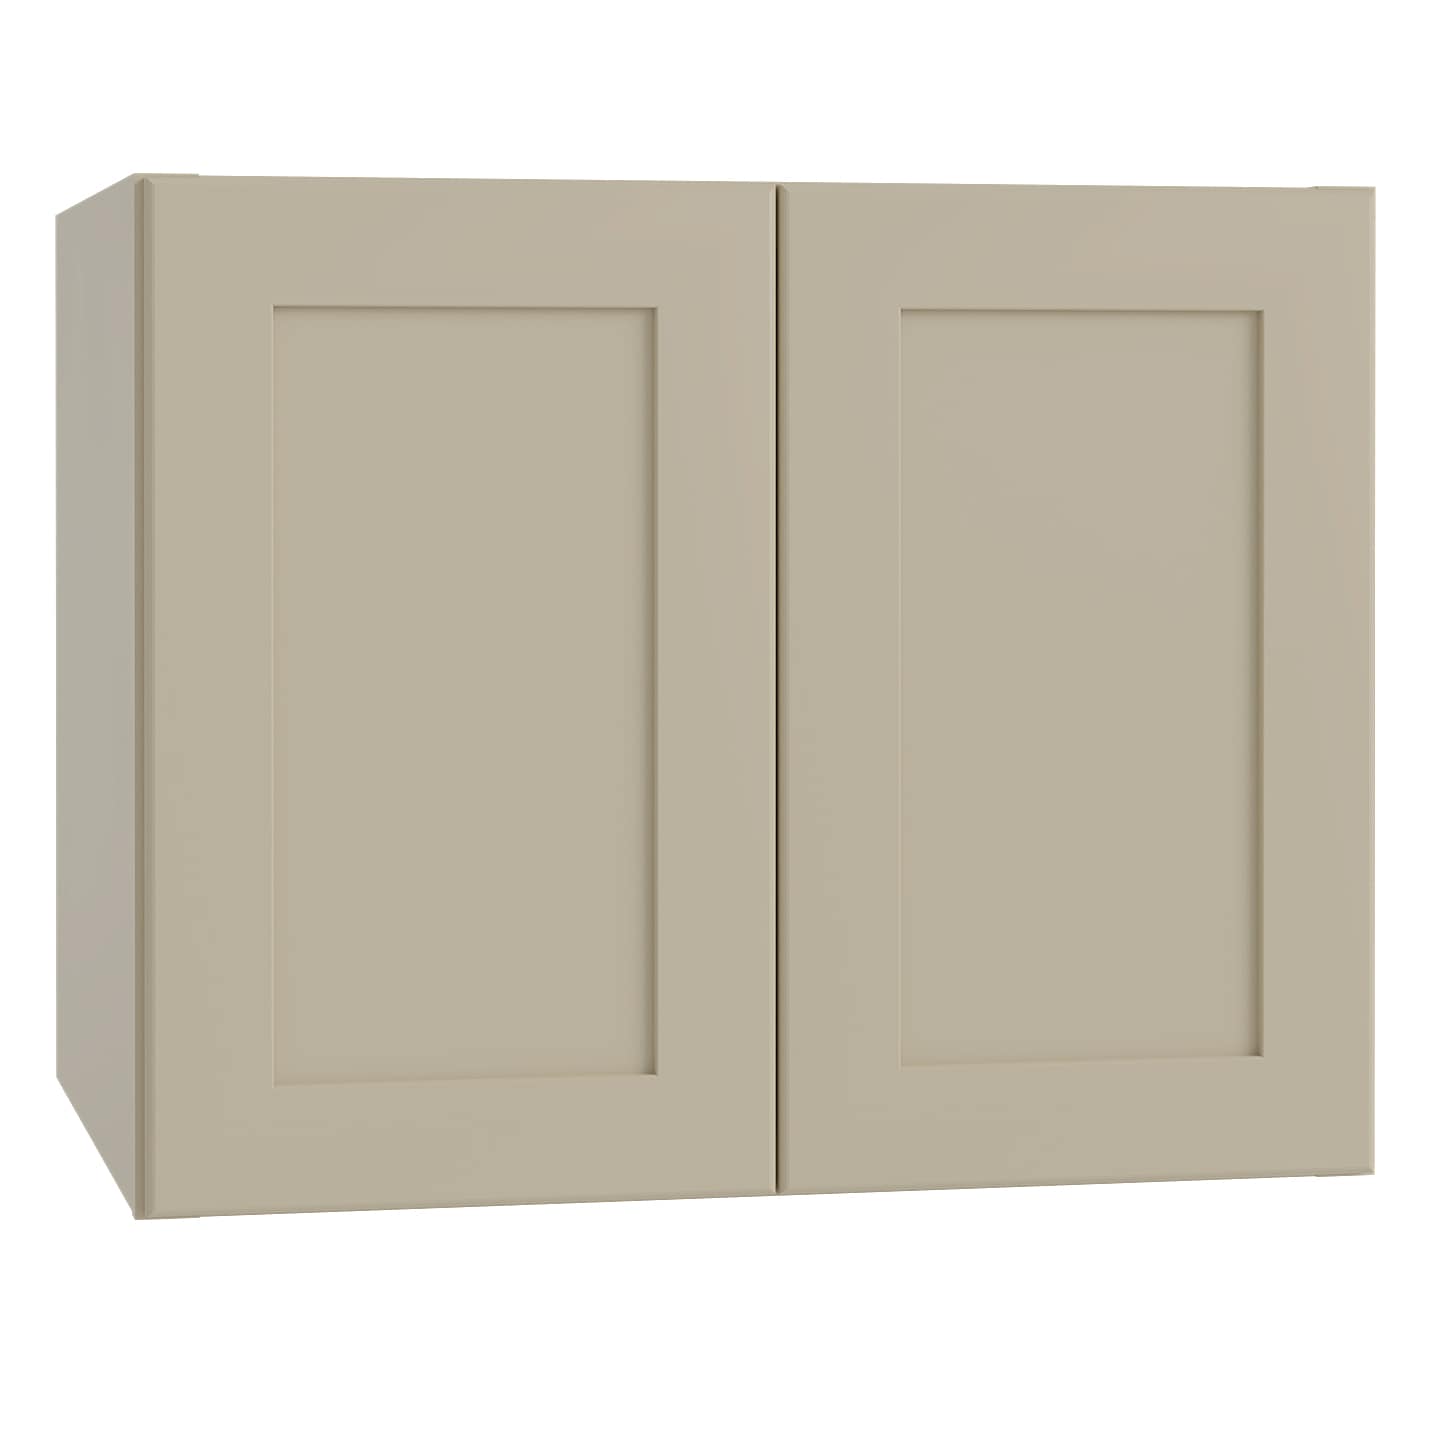 Luxxe Cabinetry 36-in W x 23.5-in H x 12-in D Norfolk Blended Cream Painted Door Wall Fully Assembled Semi-custom Cabinet in Off-White | W3624-NBC